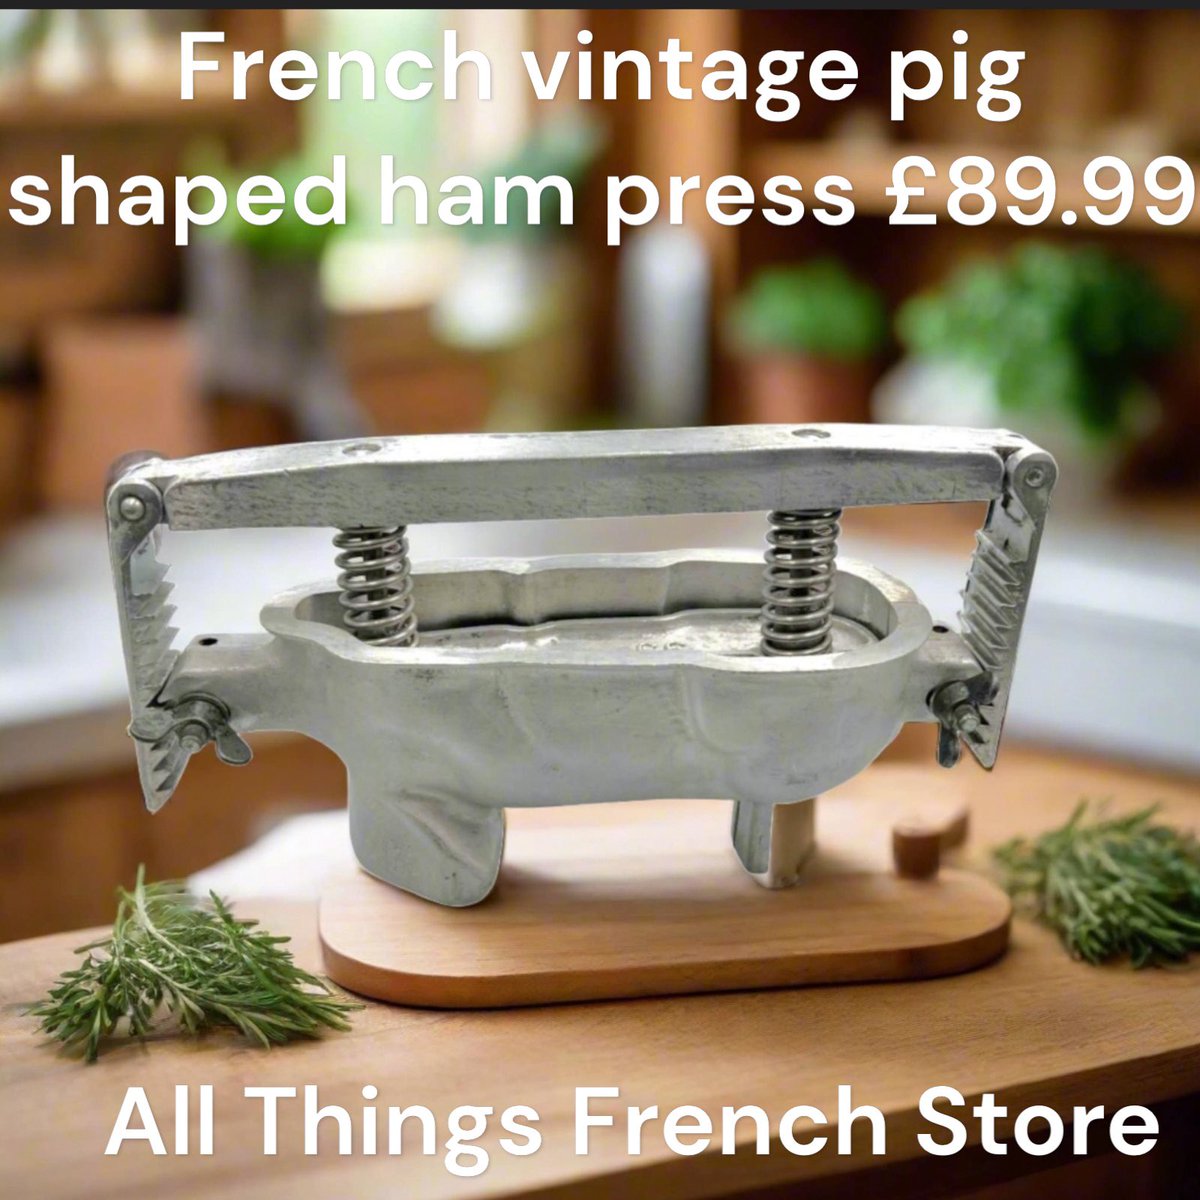 allthingsfrenchstore.com/products/frenc… #vintageshowandsell #restaurant #french From - allthingsfrenchstore.co.uk